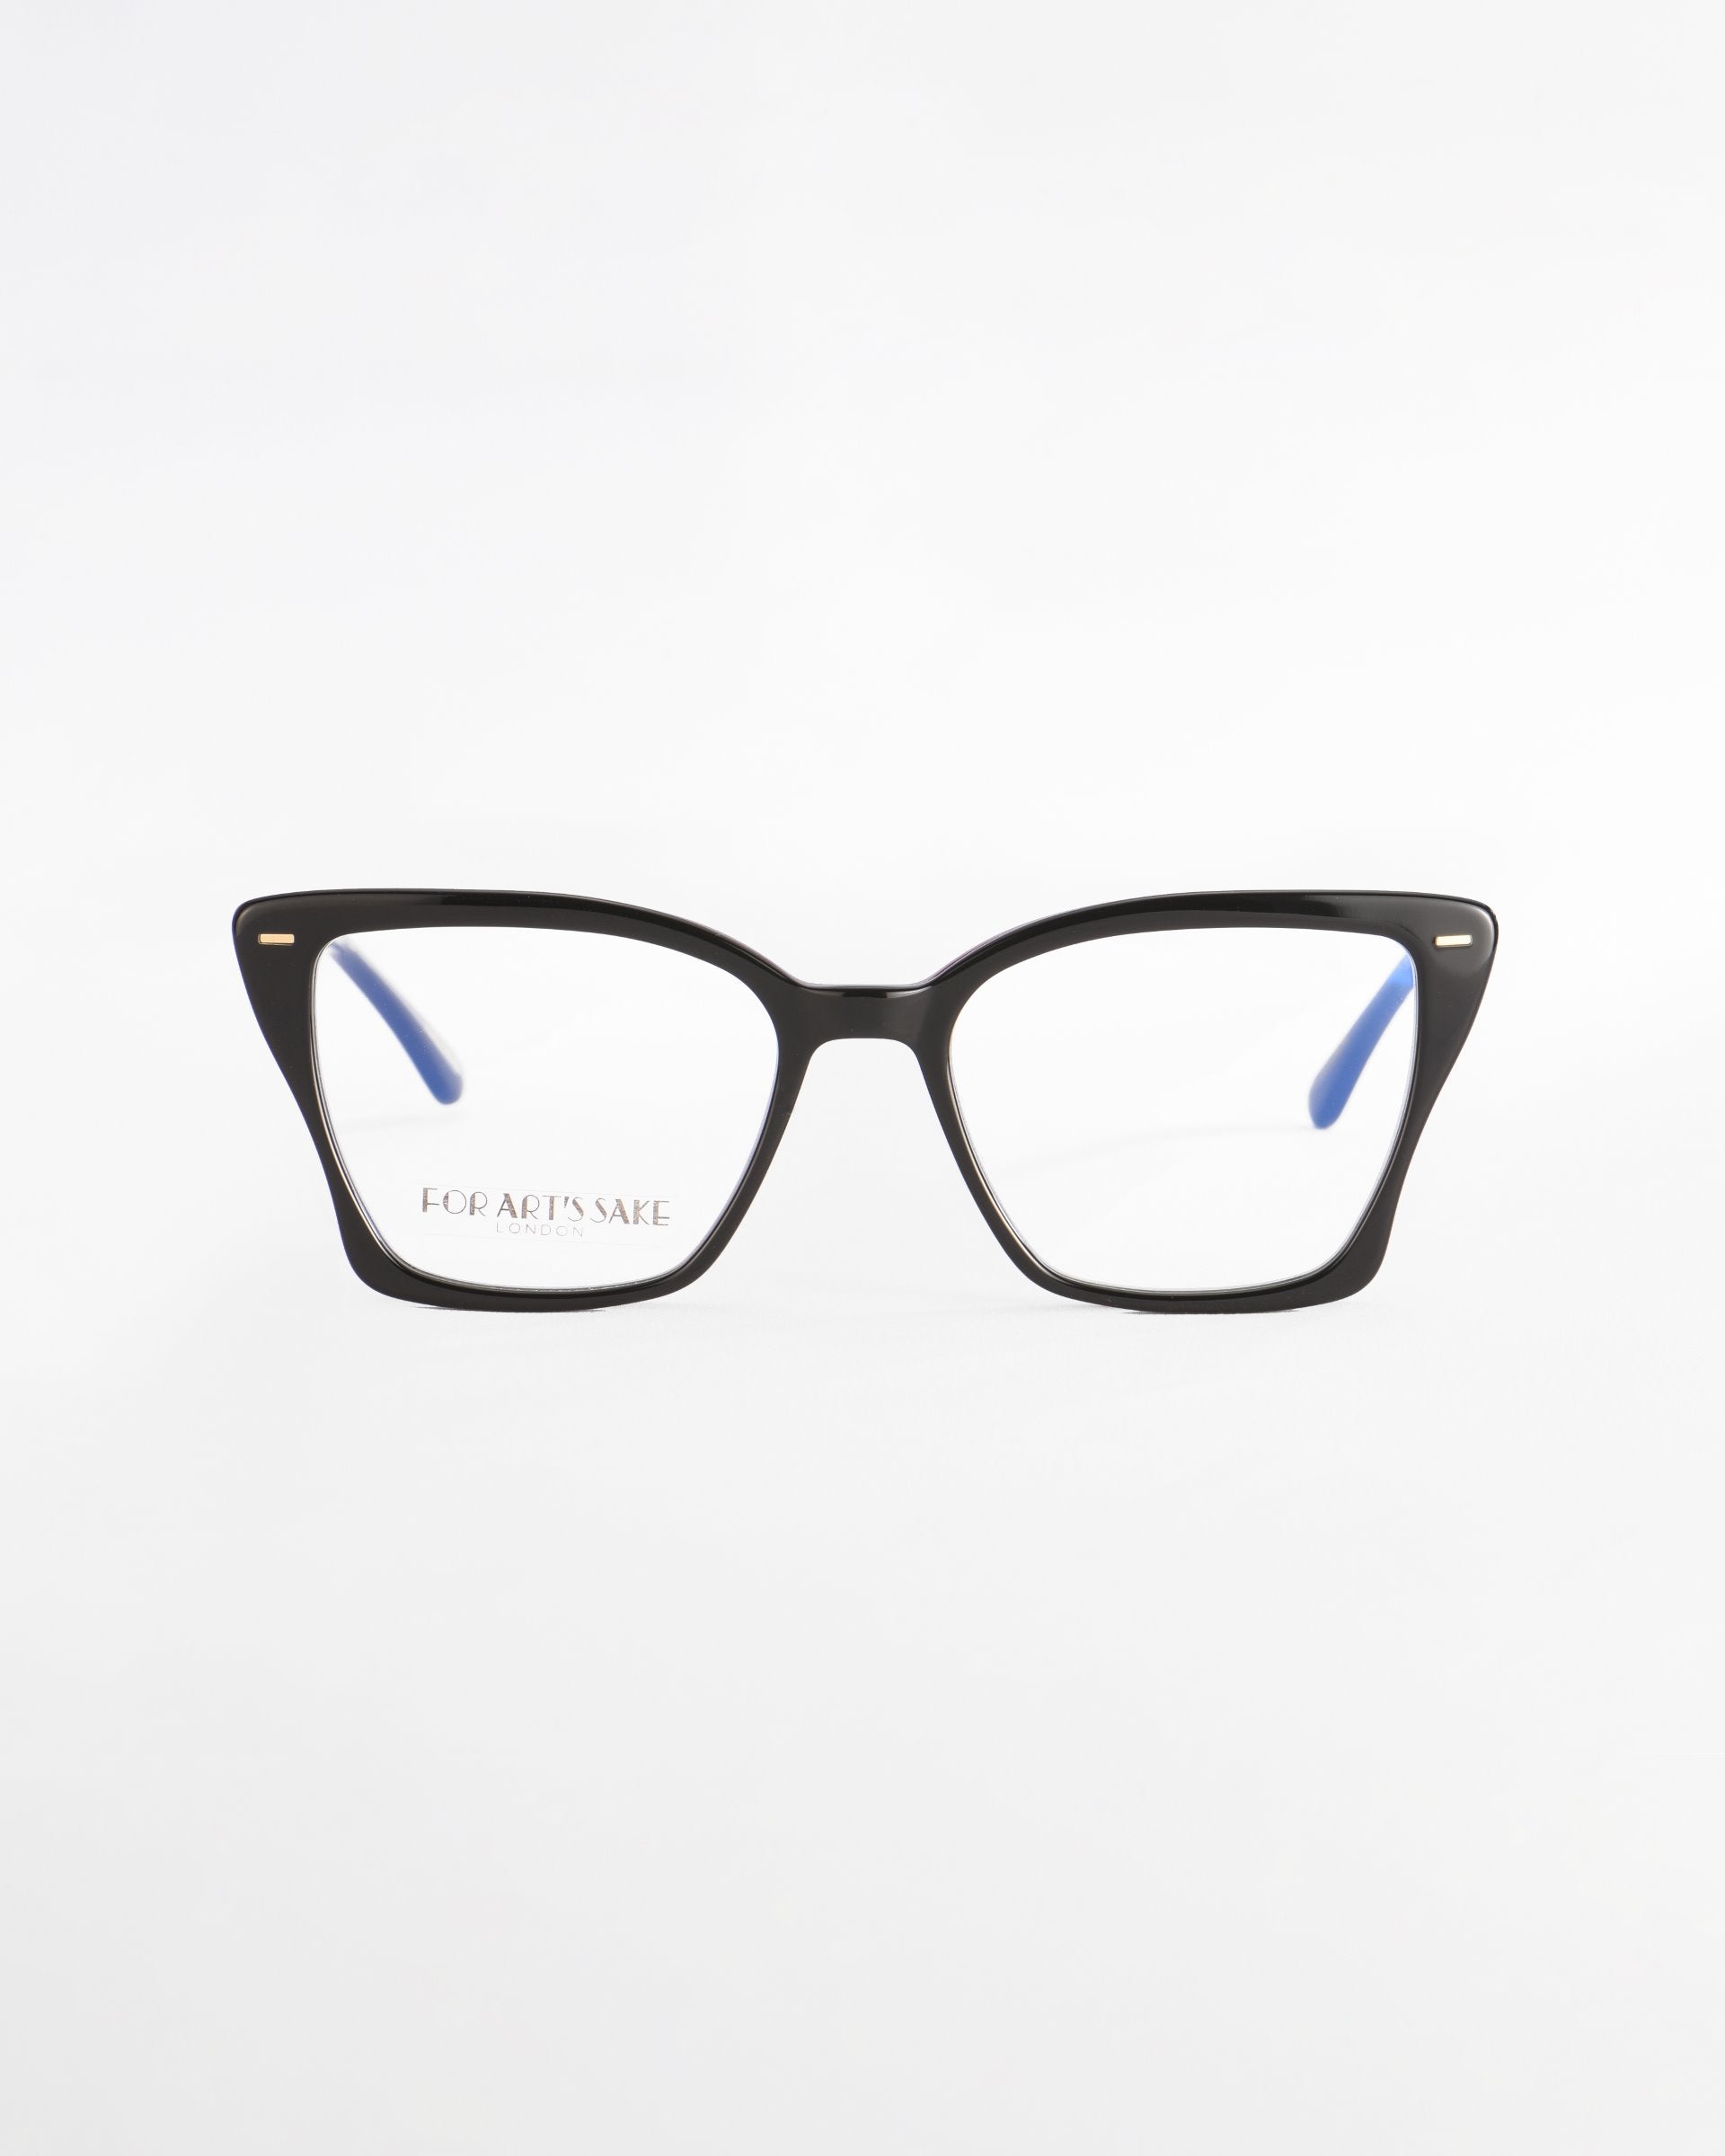 A pair of stylish black cat-eye Dion eyeglasses with thin blue temples and tortoiseshell frames. The lenses are clear and offer UV protection, featuring an engraving "FOR ART'S SAKE®" on the left lens. The glasses are positioned against a plain white background.